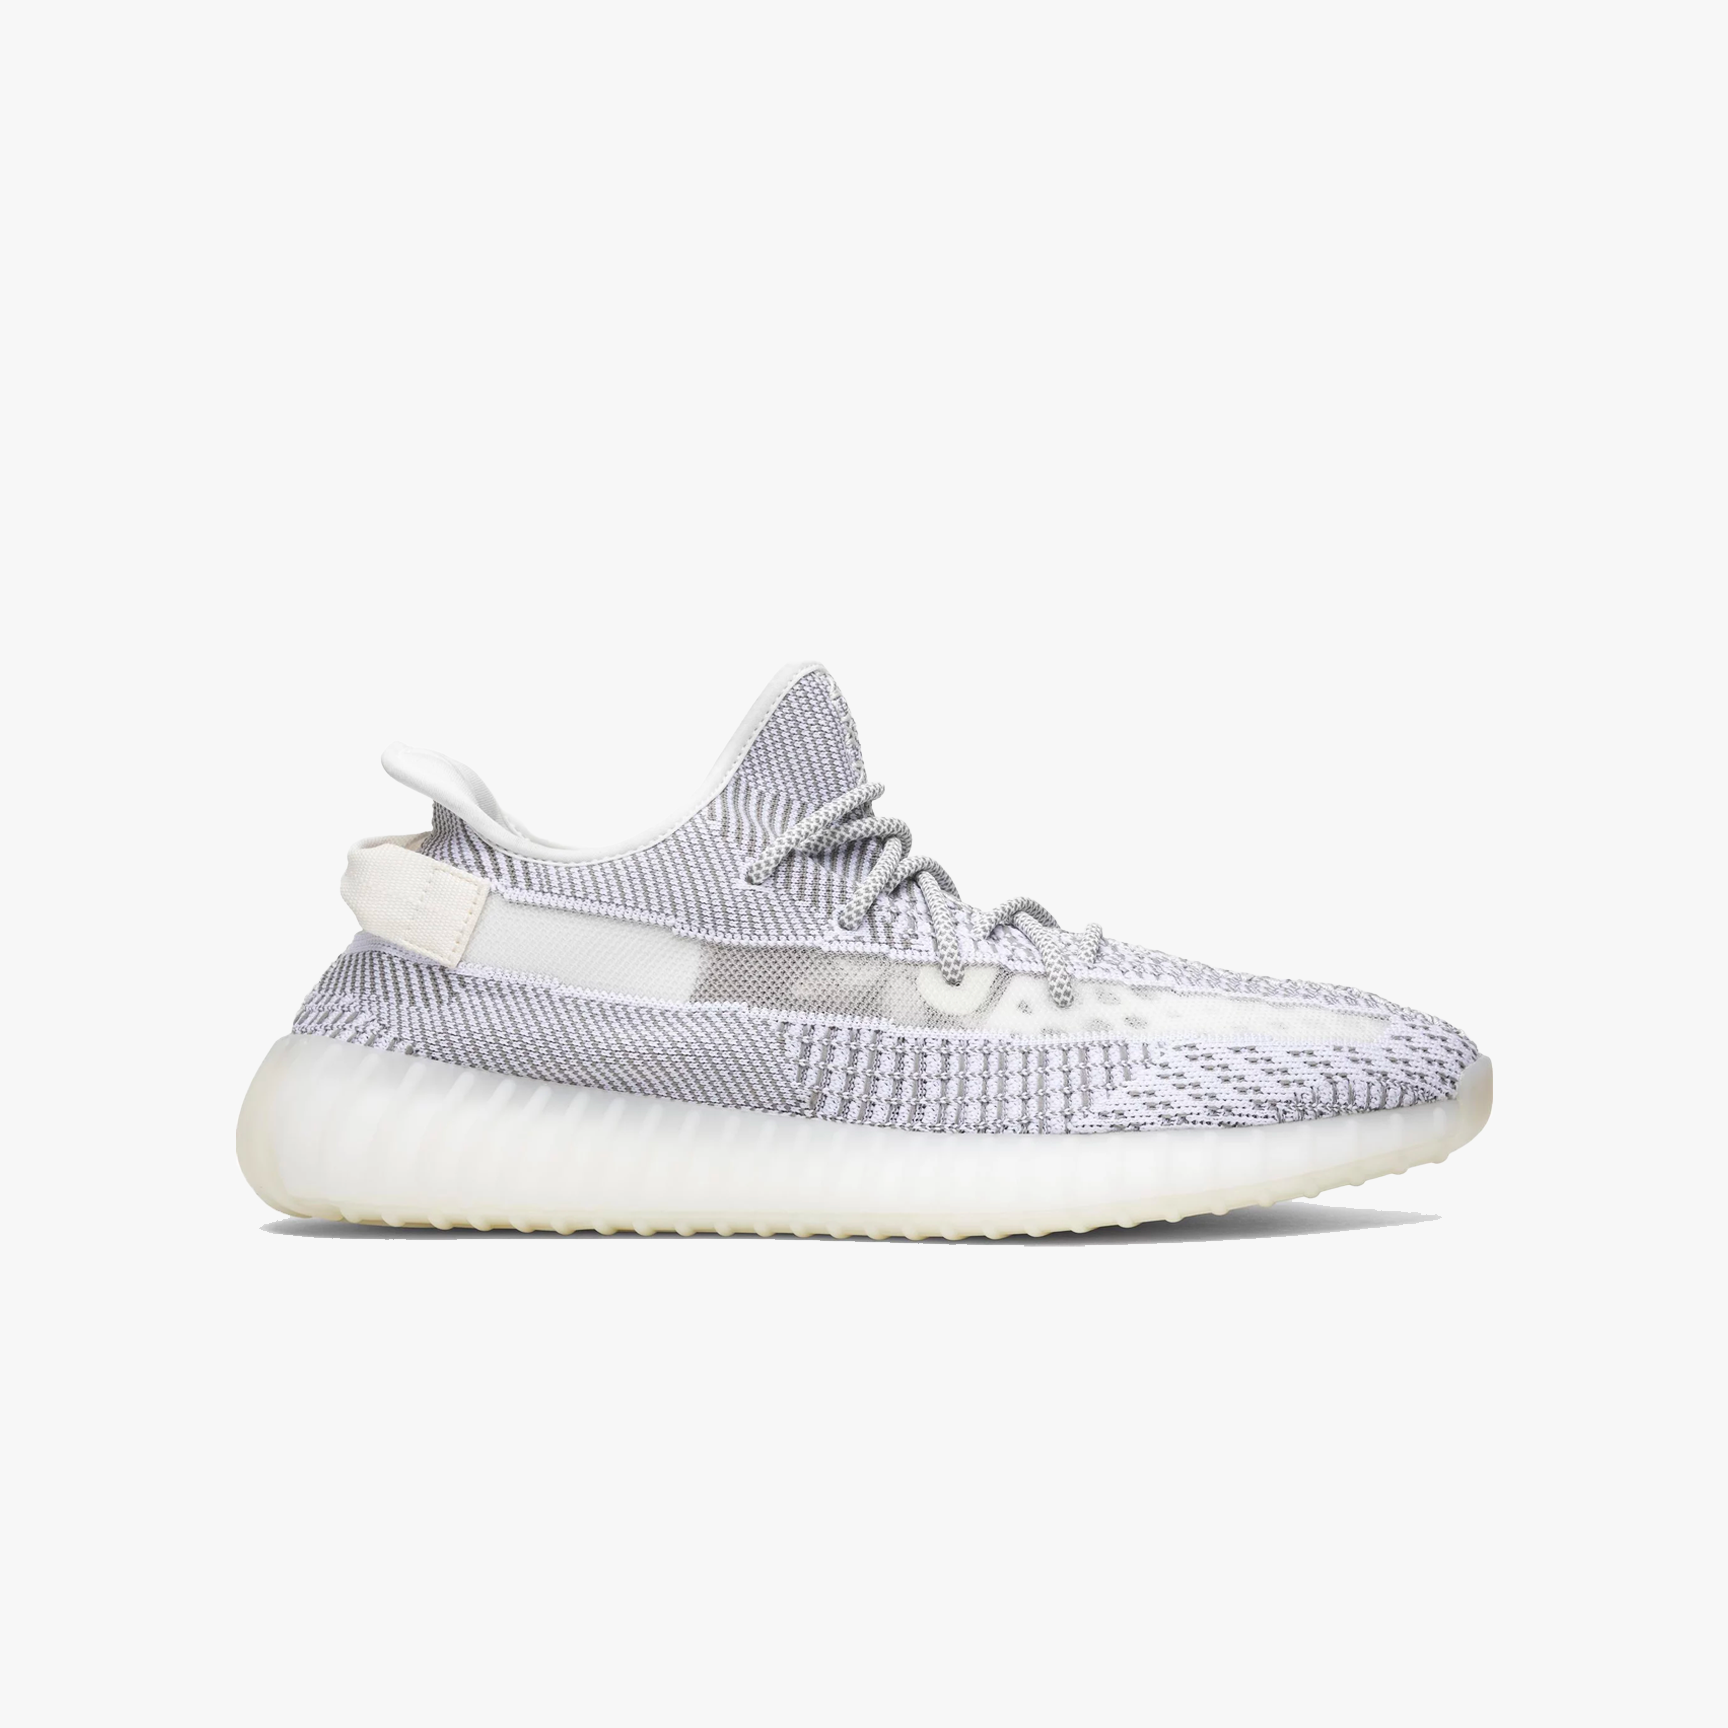 Yeezy Boost 350 V2 'Static Non-Reflective'